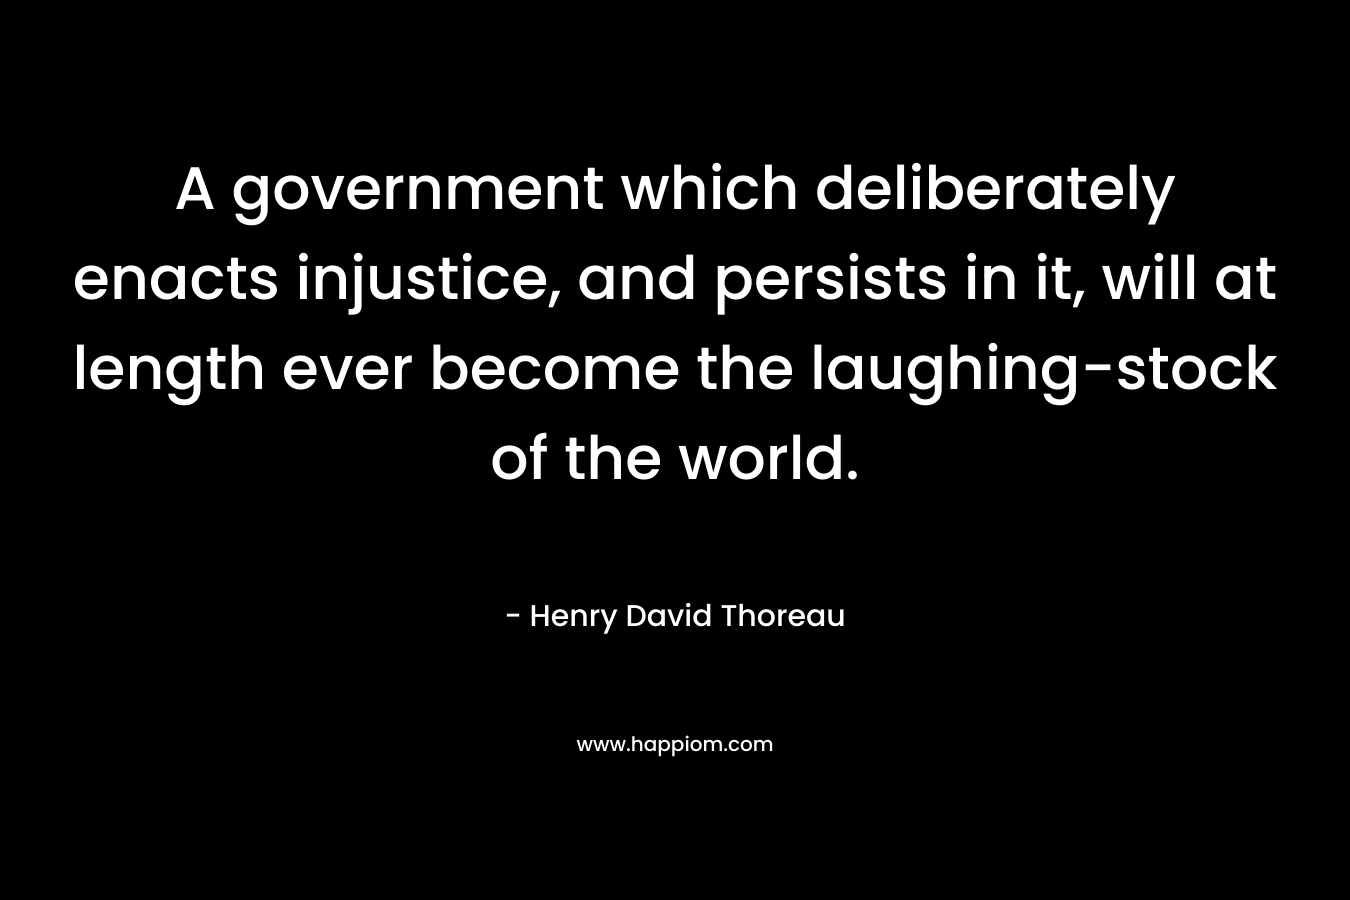 A government which deliberately enacts injustice, and persists in it, will at length ever become the laughing-stock of the world. – Henry David Thoreau